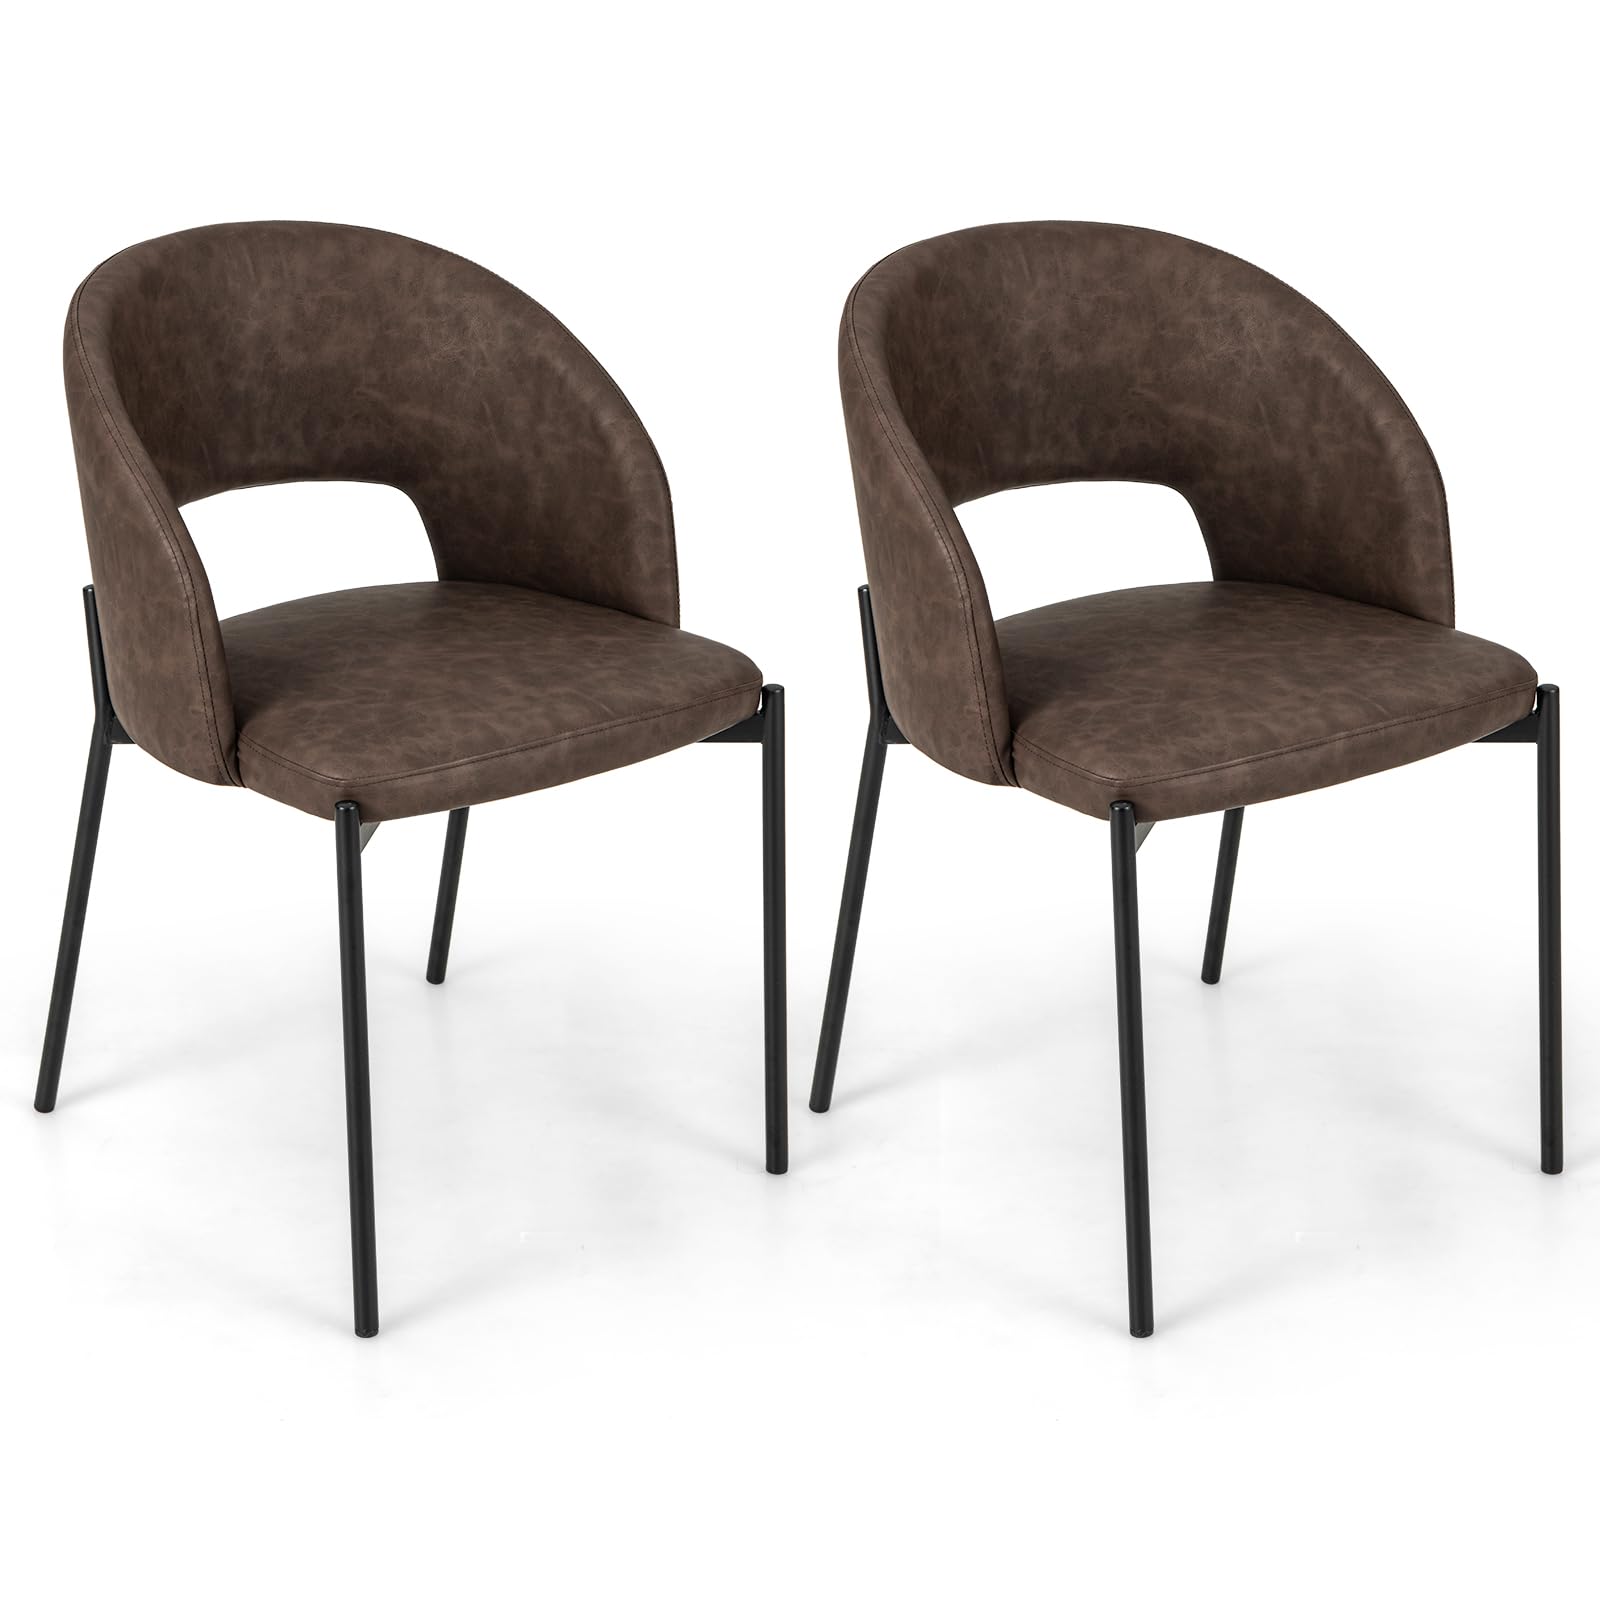 Giantex Dining Chairs, Upholstered Accent Chairs w/High-Density Sponge Cushion